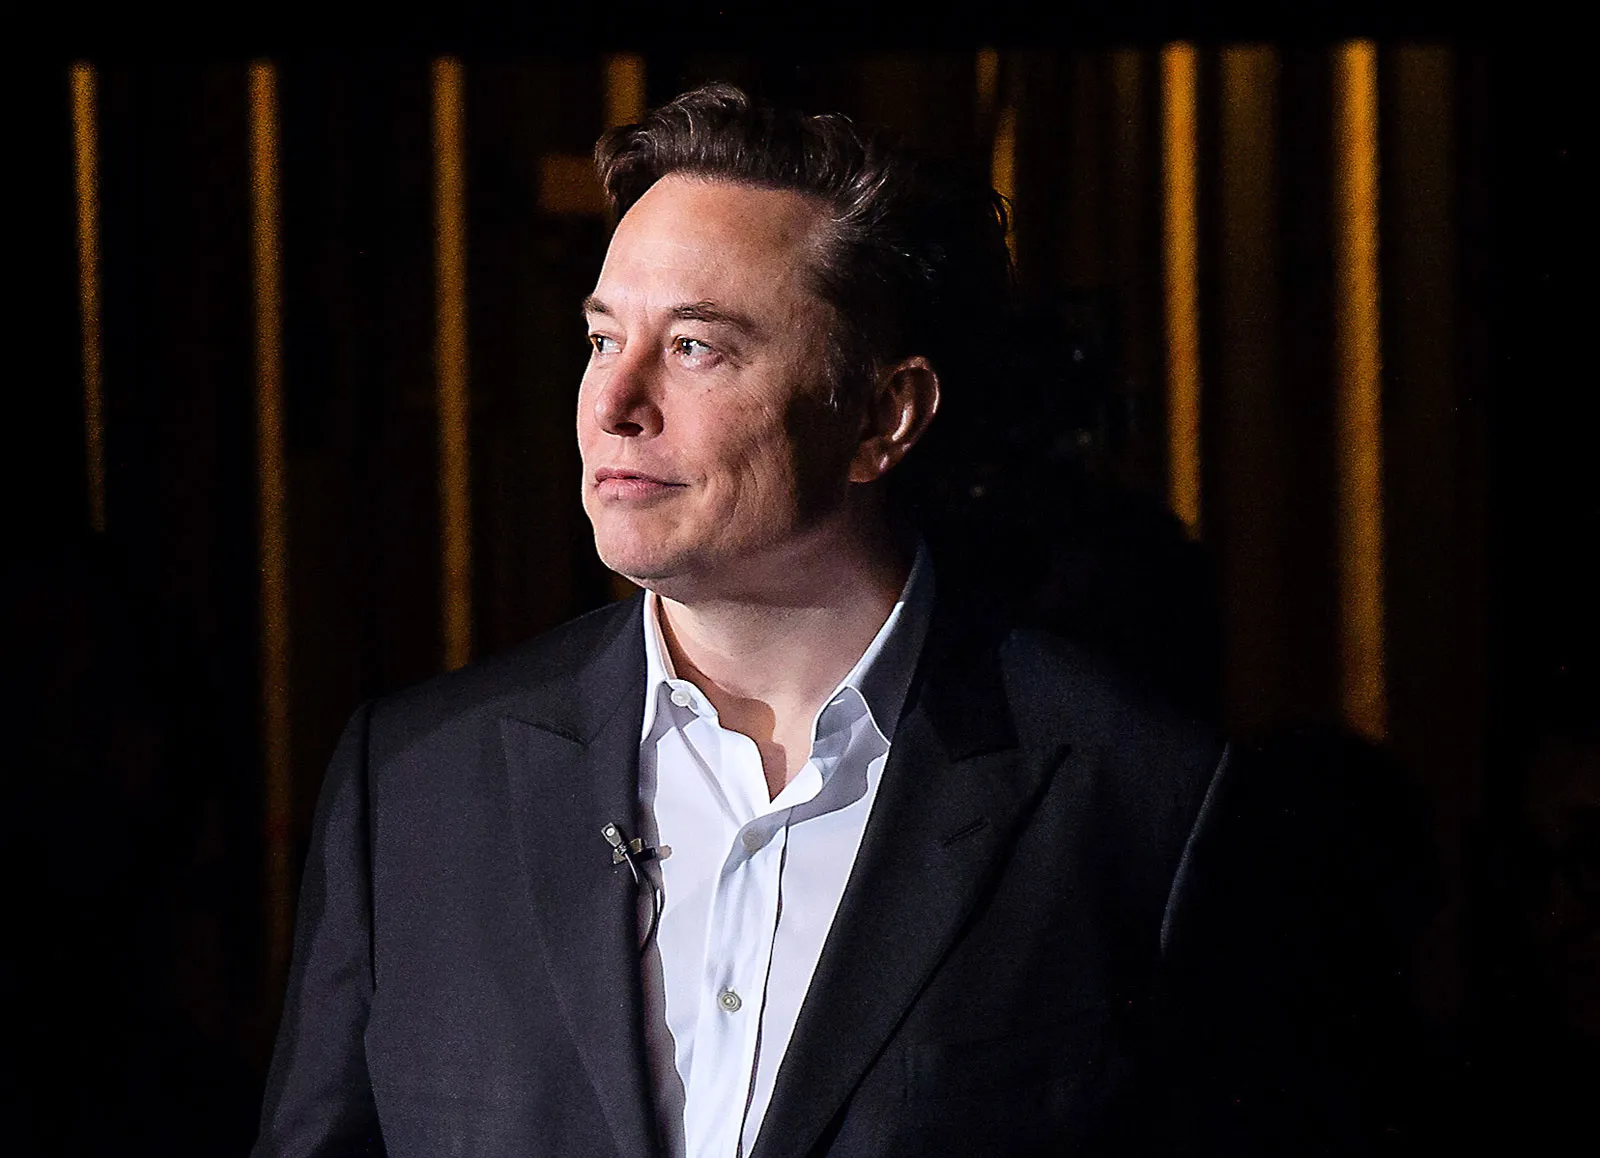 The director of 'Black Swan' is set to take the helm for Elon Musk's biopic.